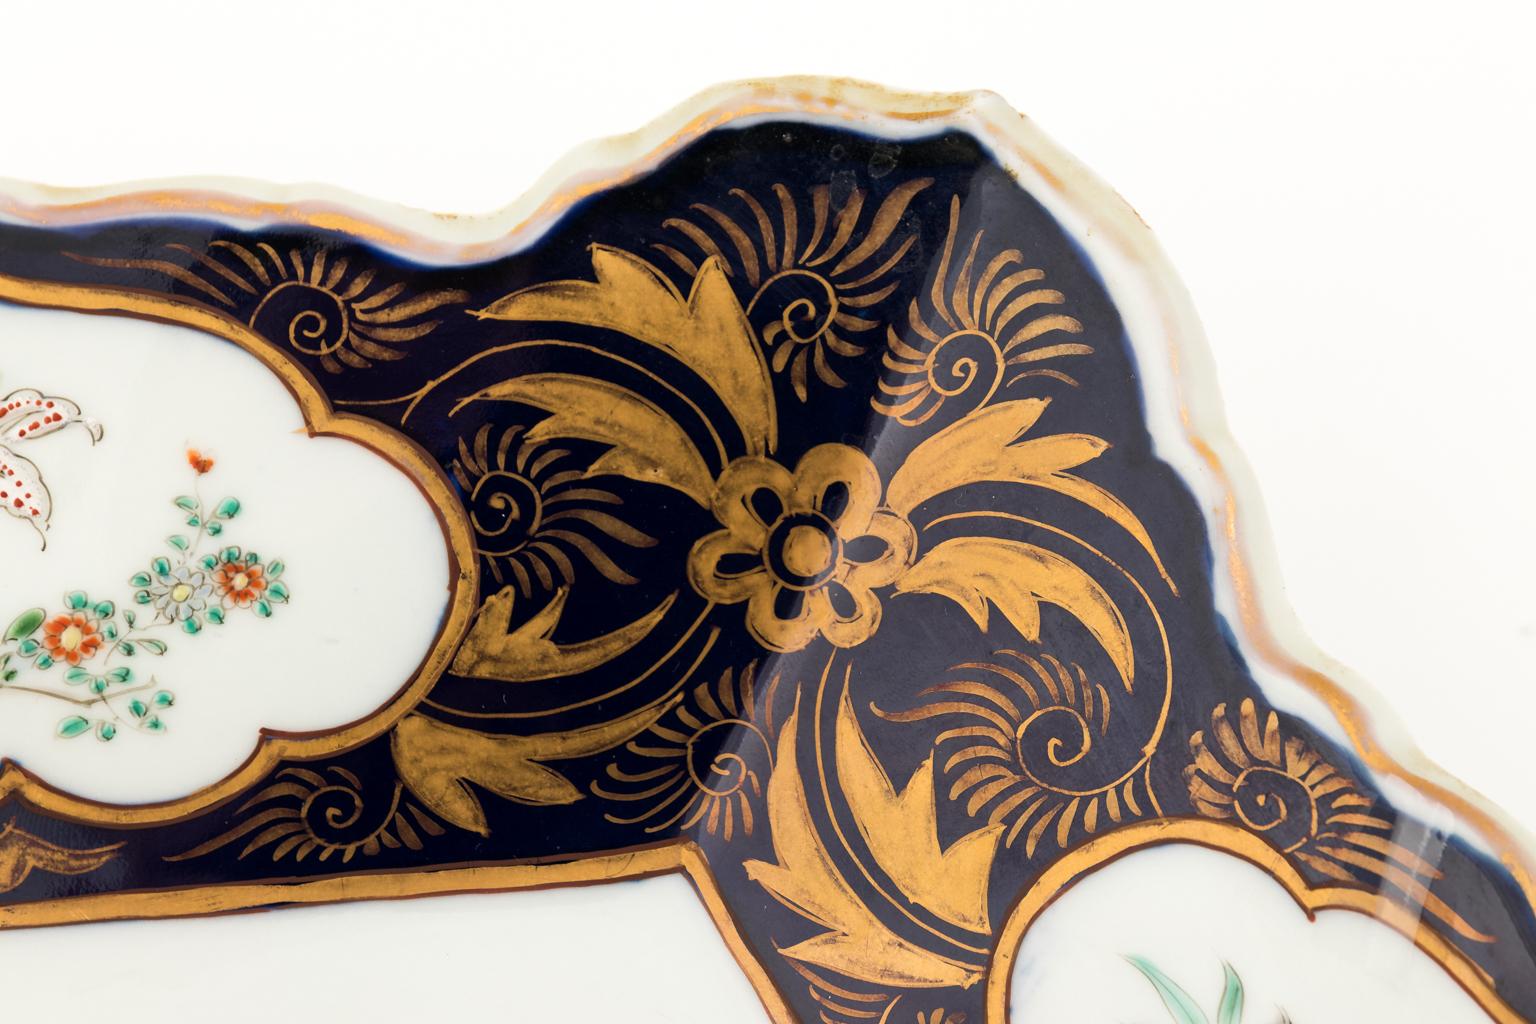 Rare shaped oriental charger. Vibrant colors. Six-star corners with a medallion design. Hand-painted. Signed on back.
  